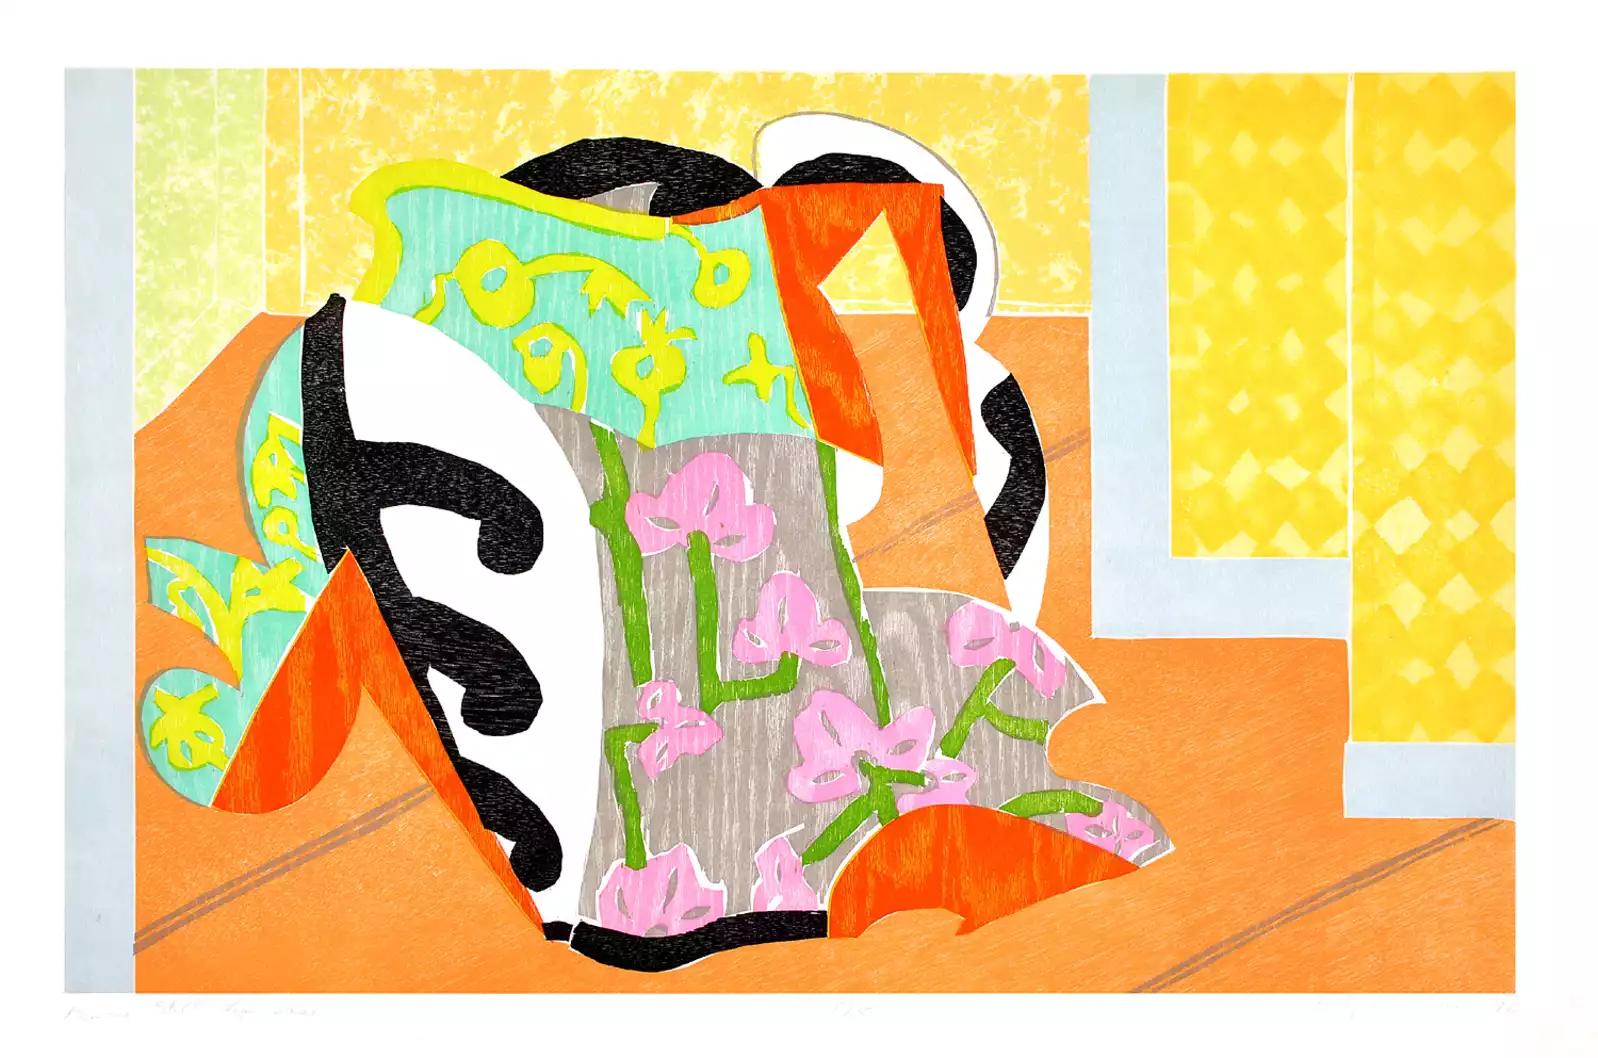 Kimono Still Life Vase (INV# NP3630)
Betty Woodman 
color woodcut with chine collé
27.5 x 41.5
1992
# W.P. 1/2, outside the edition of 15
signed